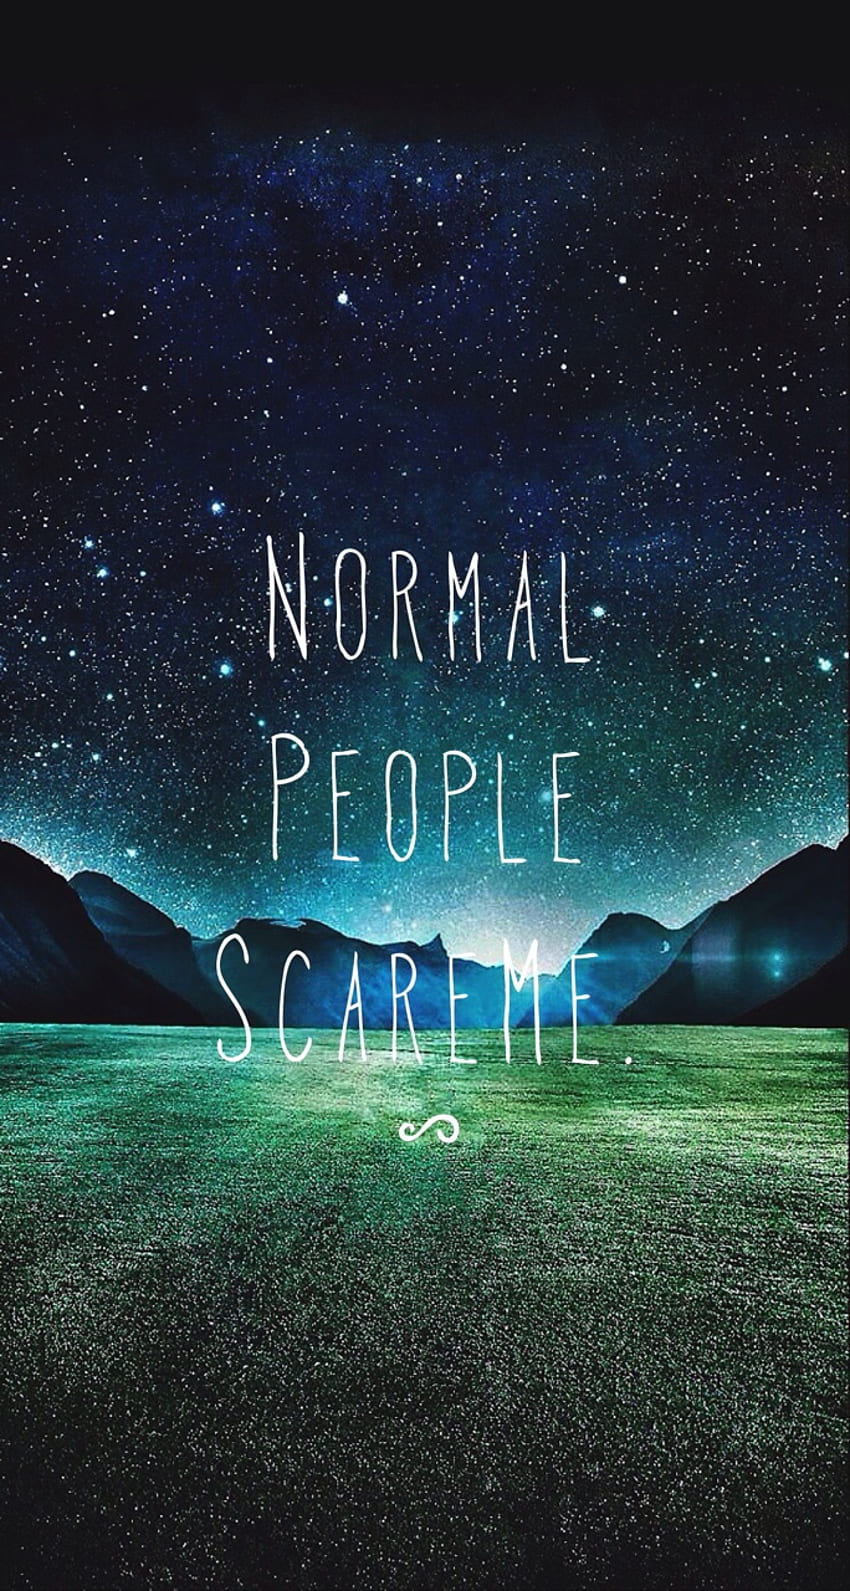 Normal people scare me discovered HD phone wallpaper